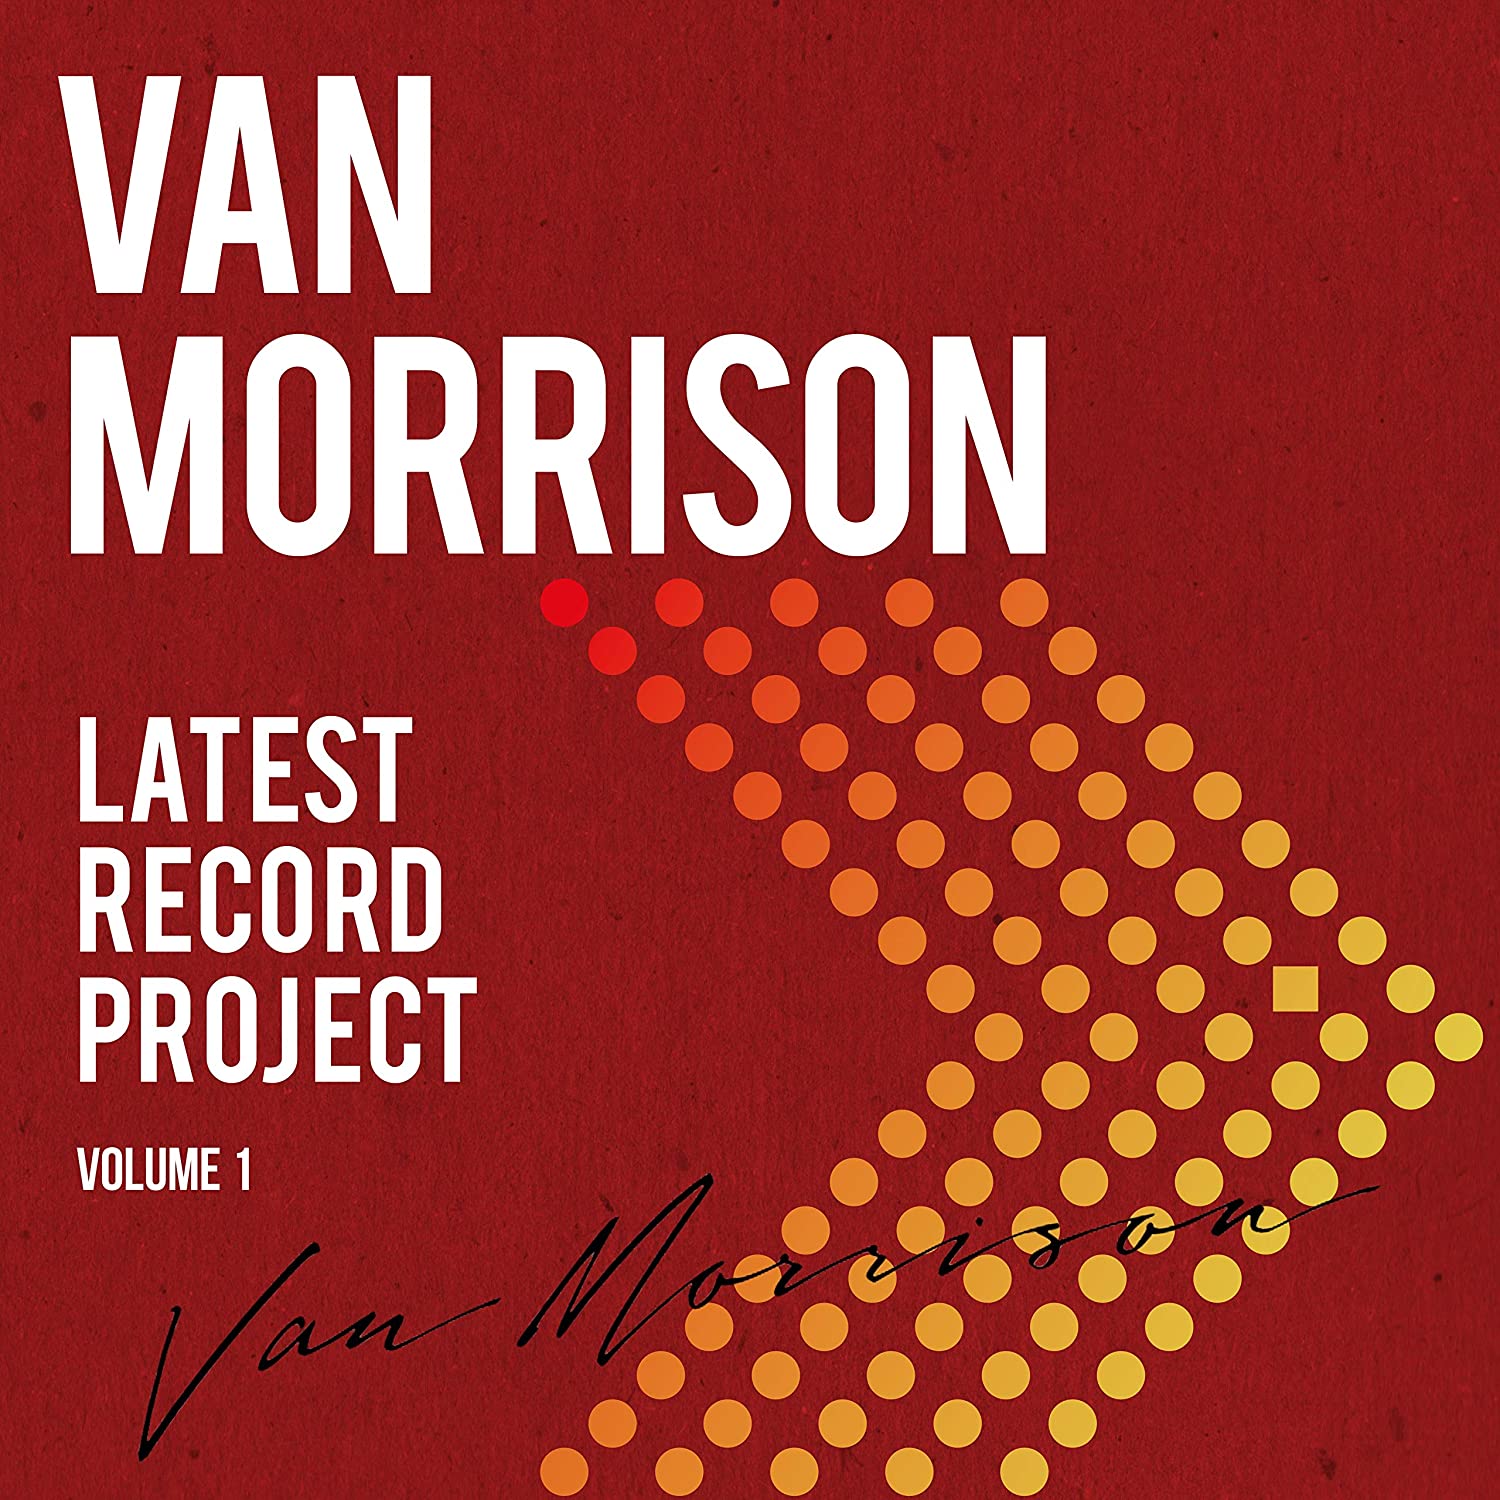 Pre-order a signed CD of Van Morrison’s forthcoming ‘Latest Record Project’